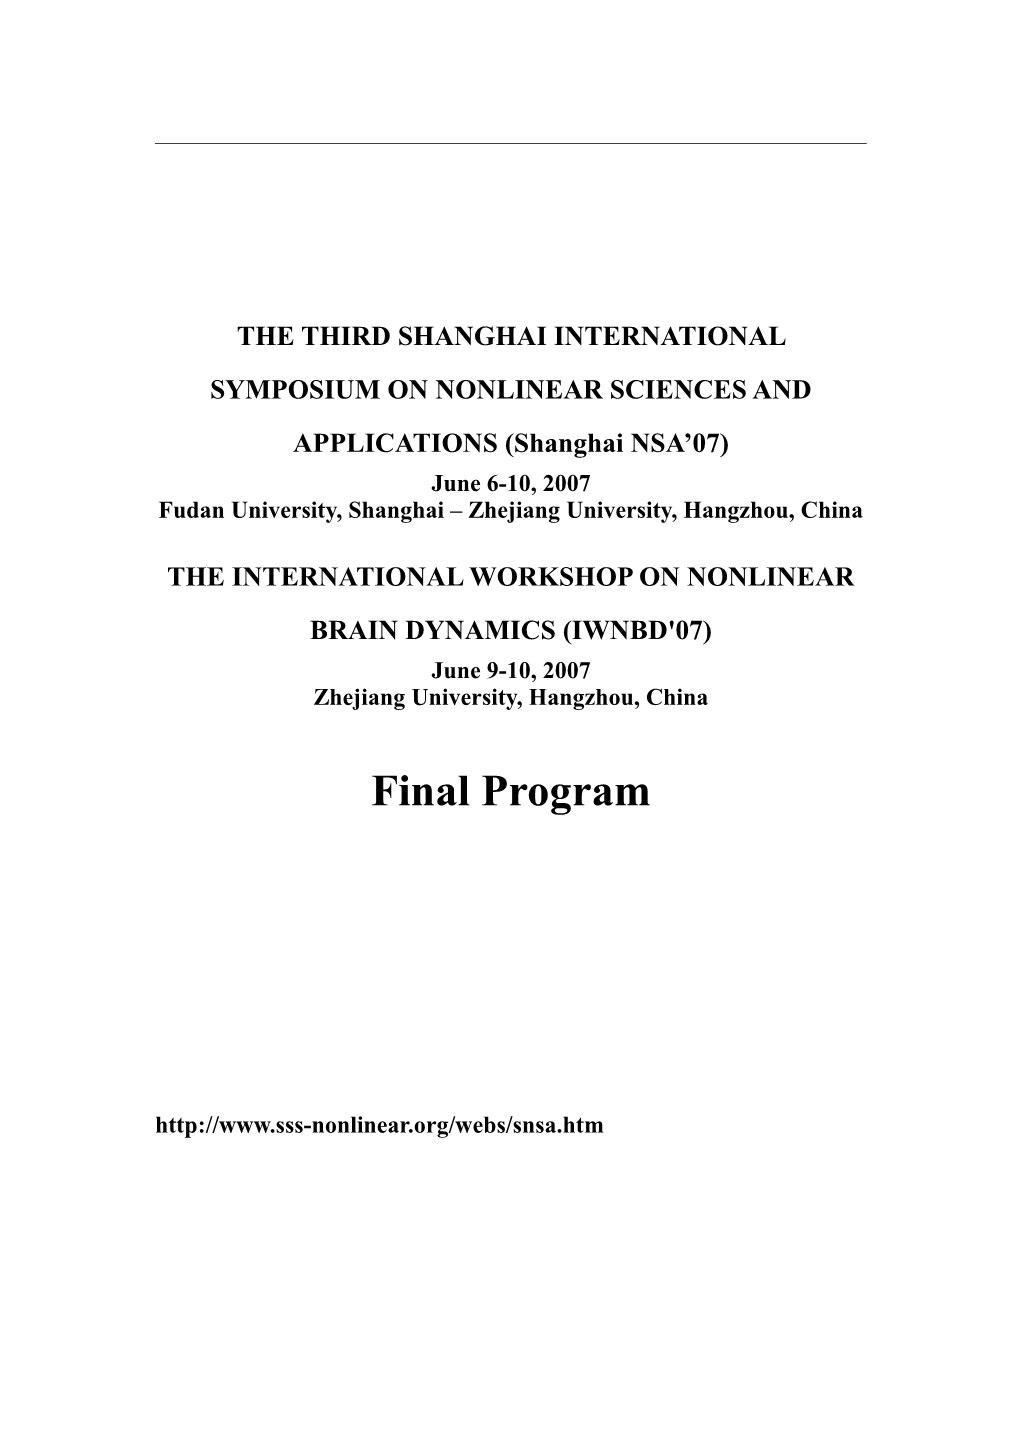 THE THIRD SHANGHAI INTERNATIONAL SYMPOSIUM on NONLINEAR SCIENCES and APPLICATIONS (Shanghai